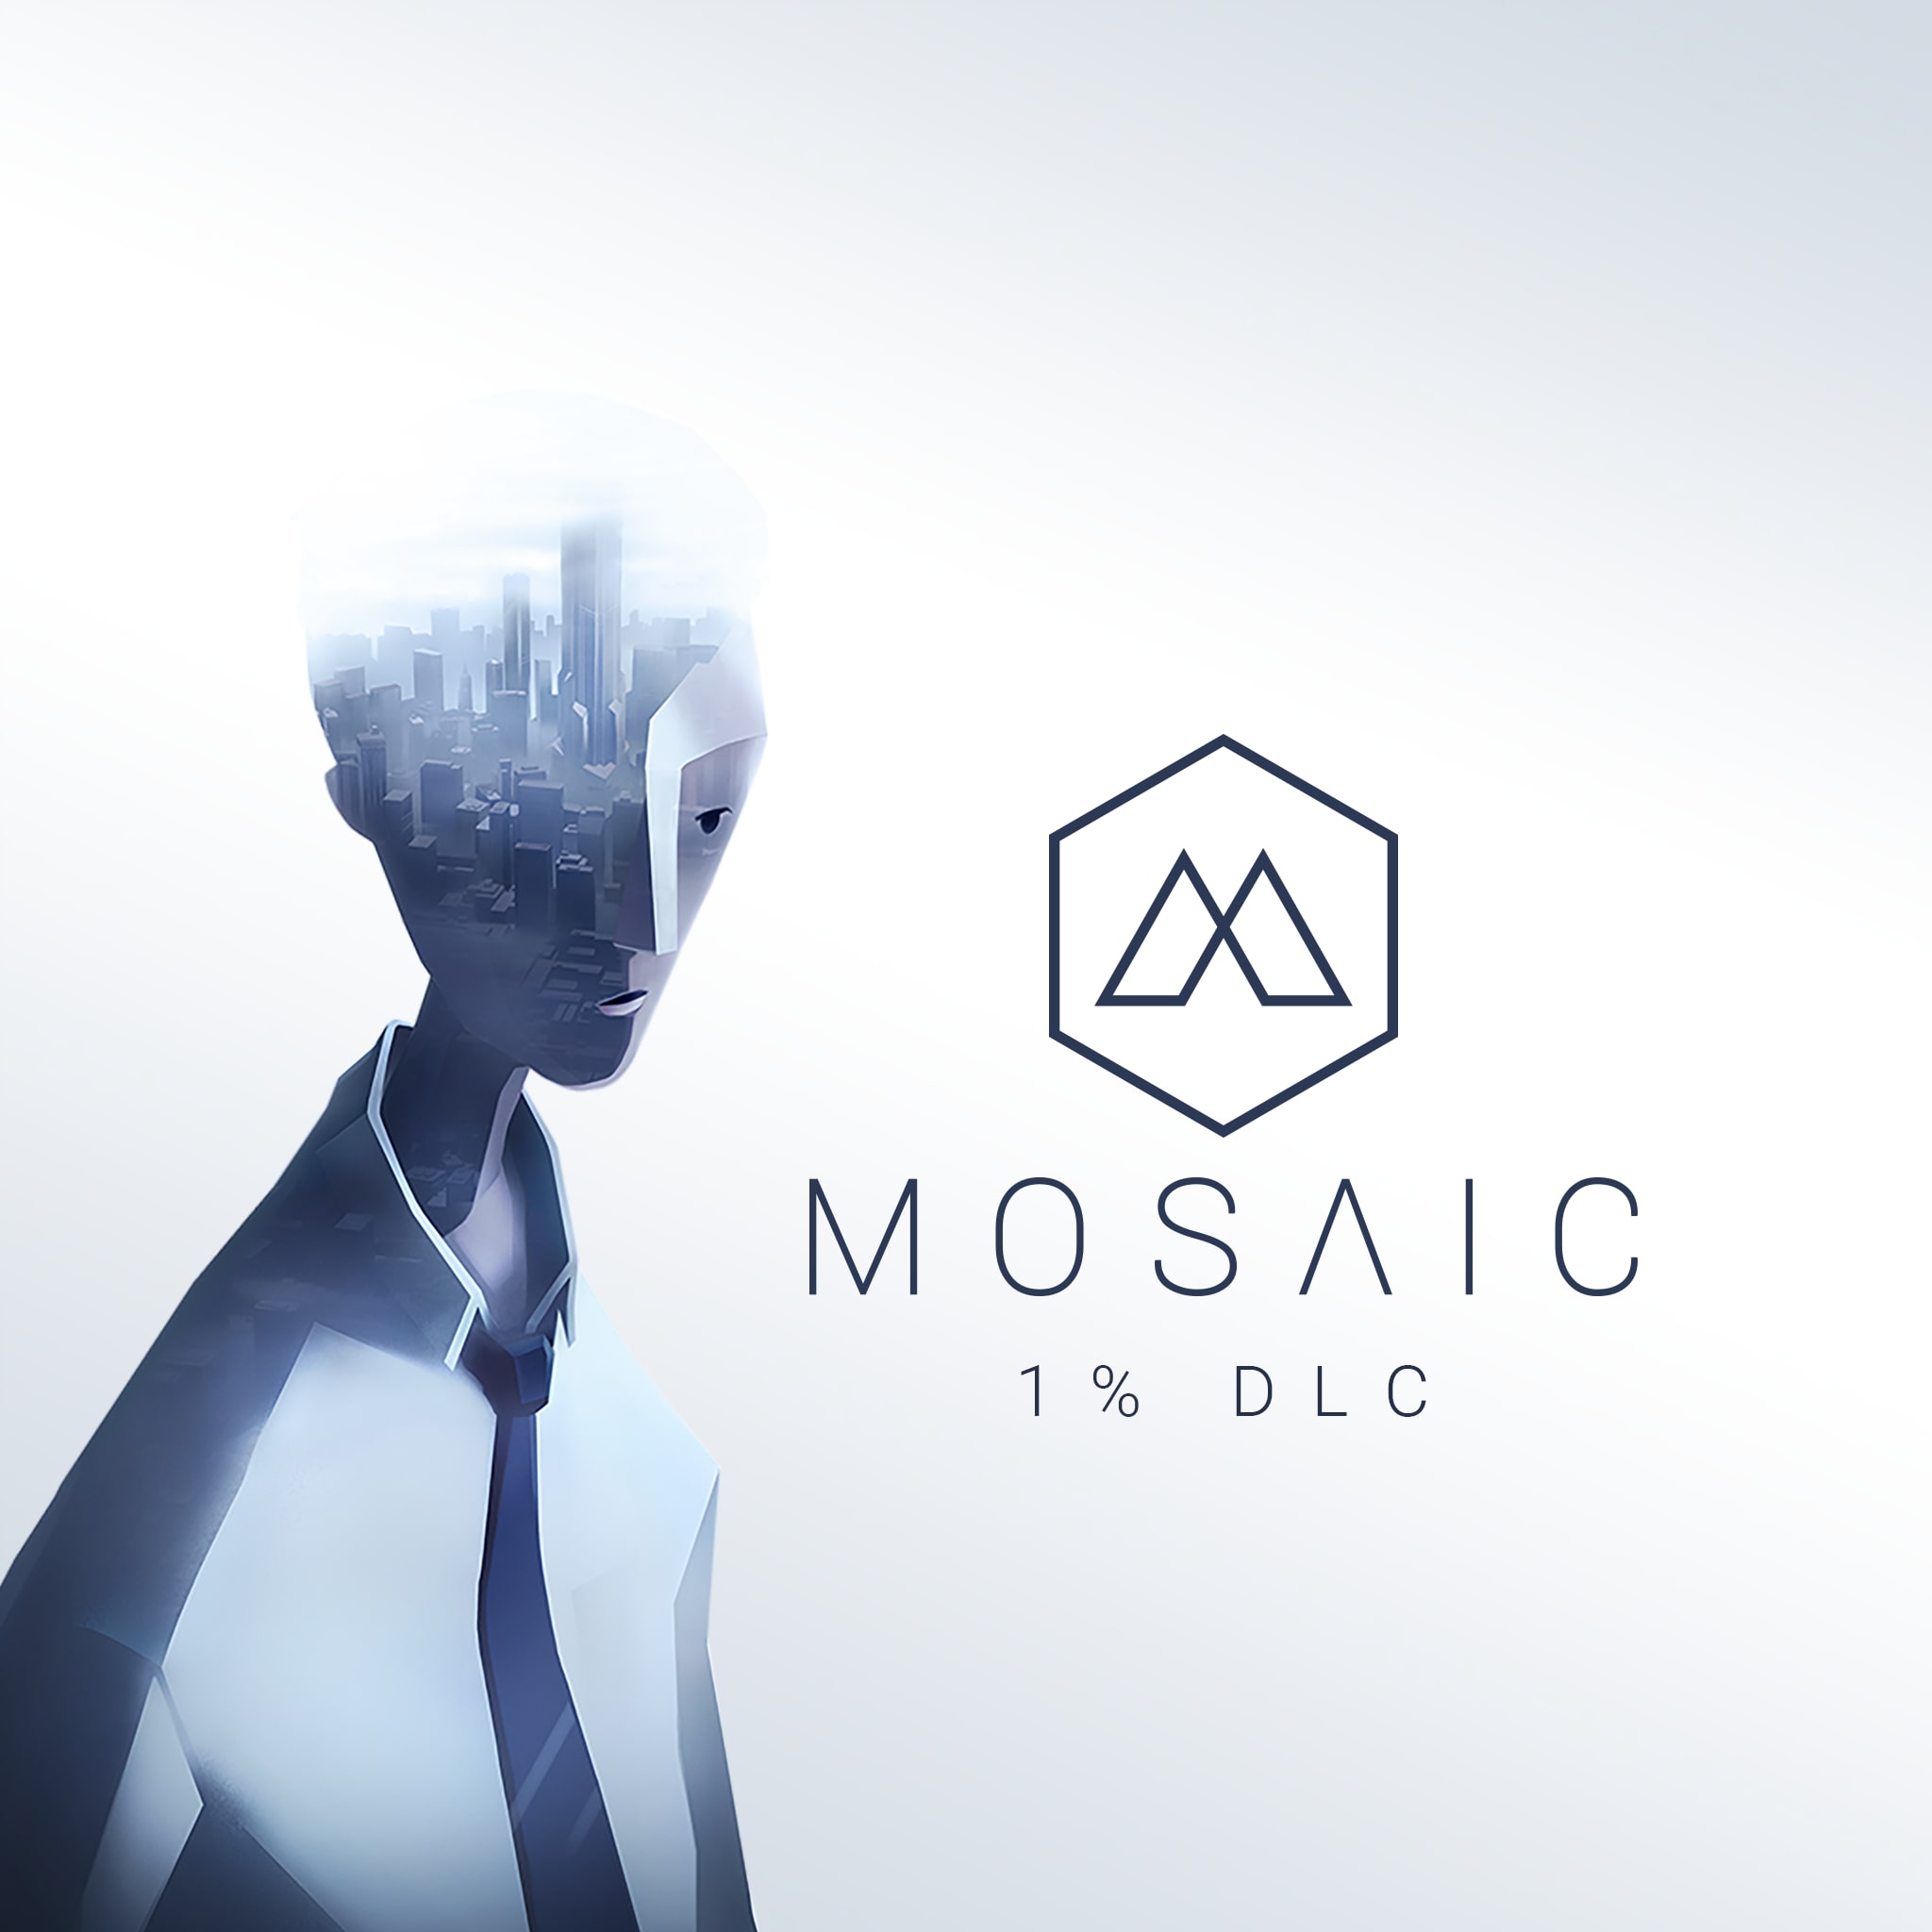 Mosaic Deluxe edition content